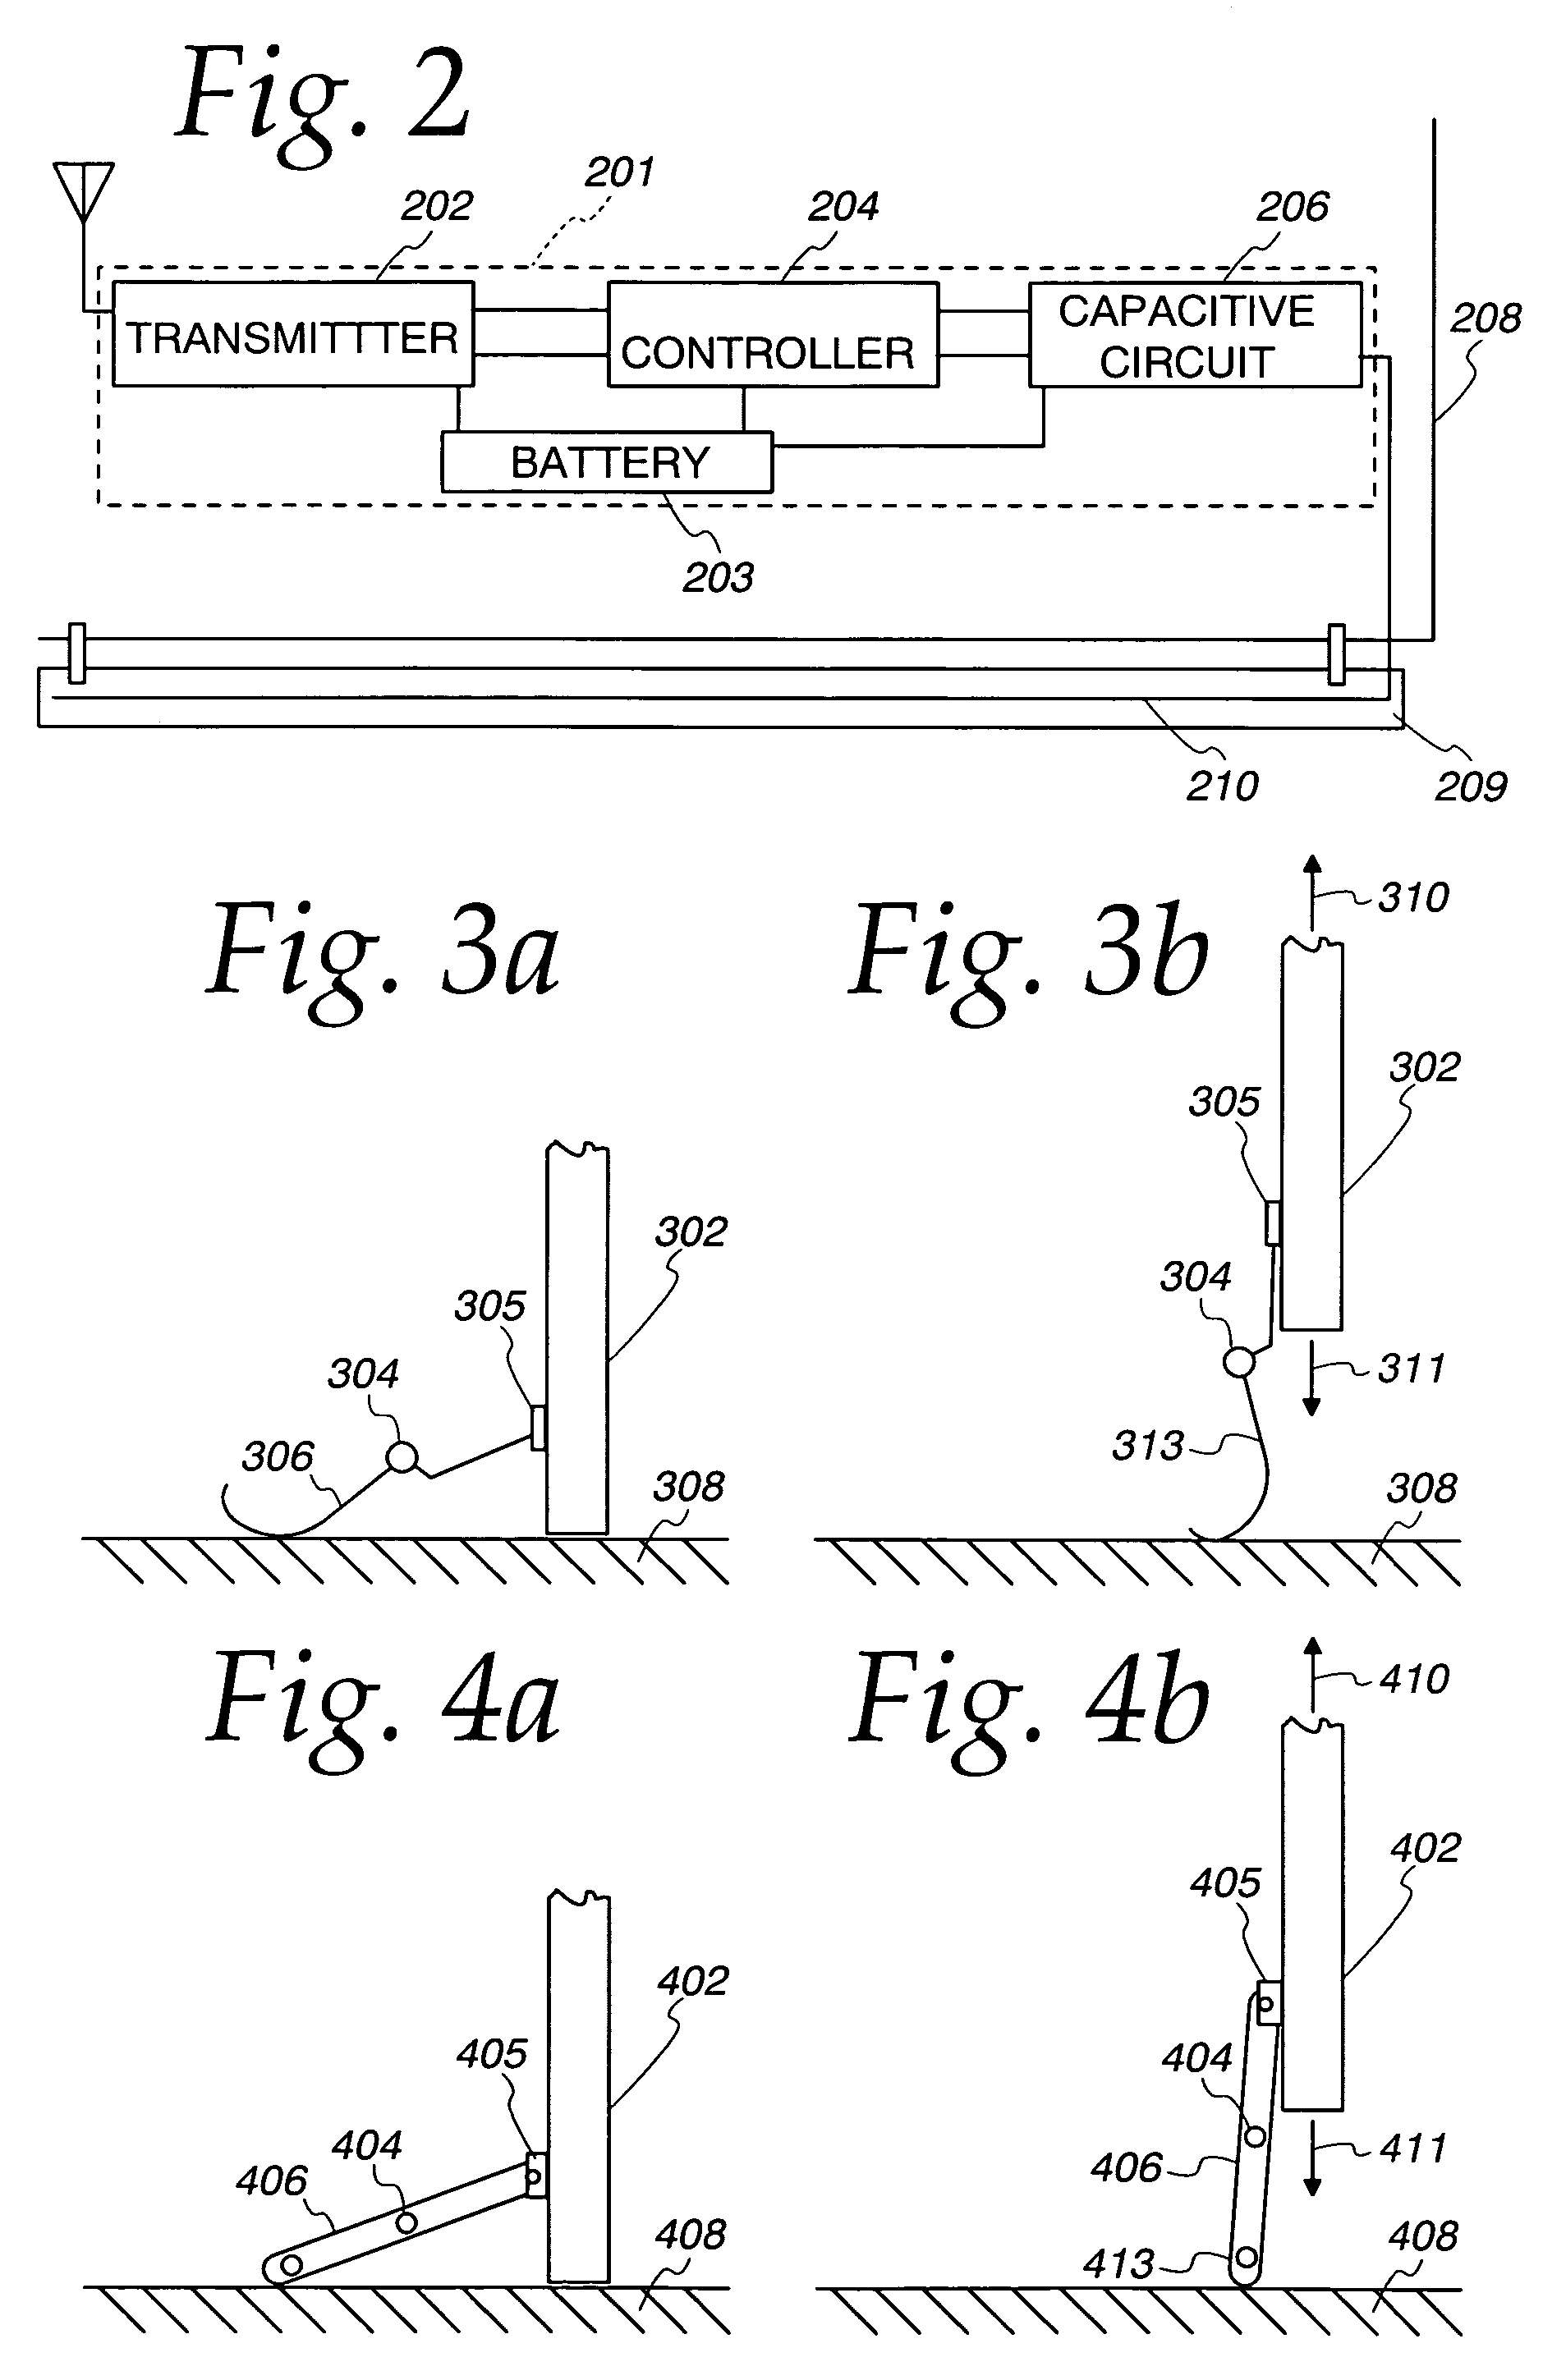 System and method for using a capacitive door edge sensor